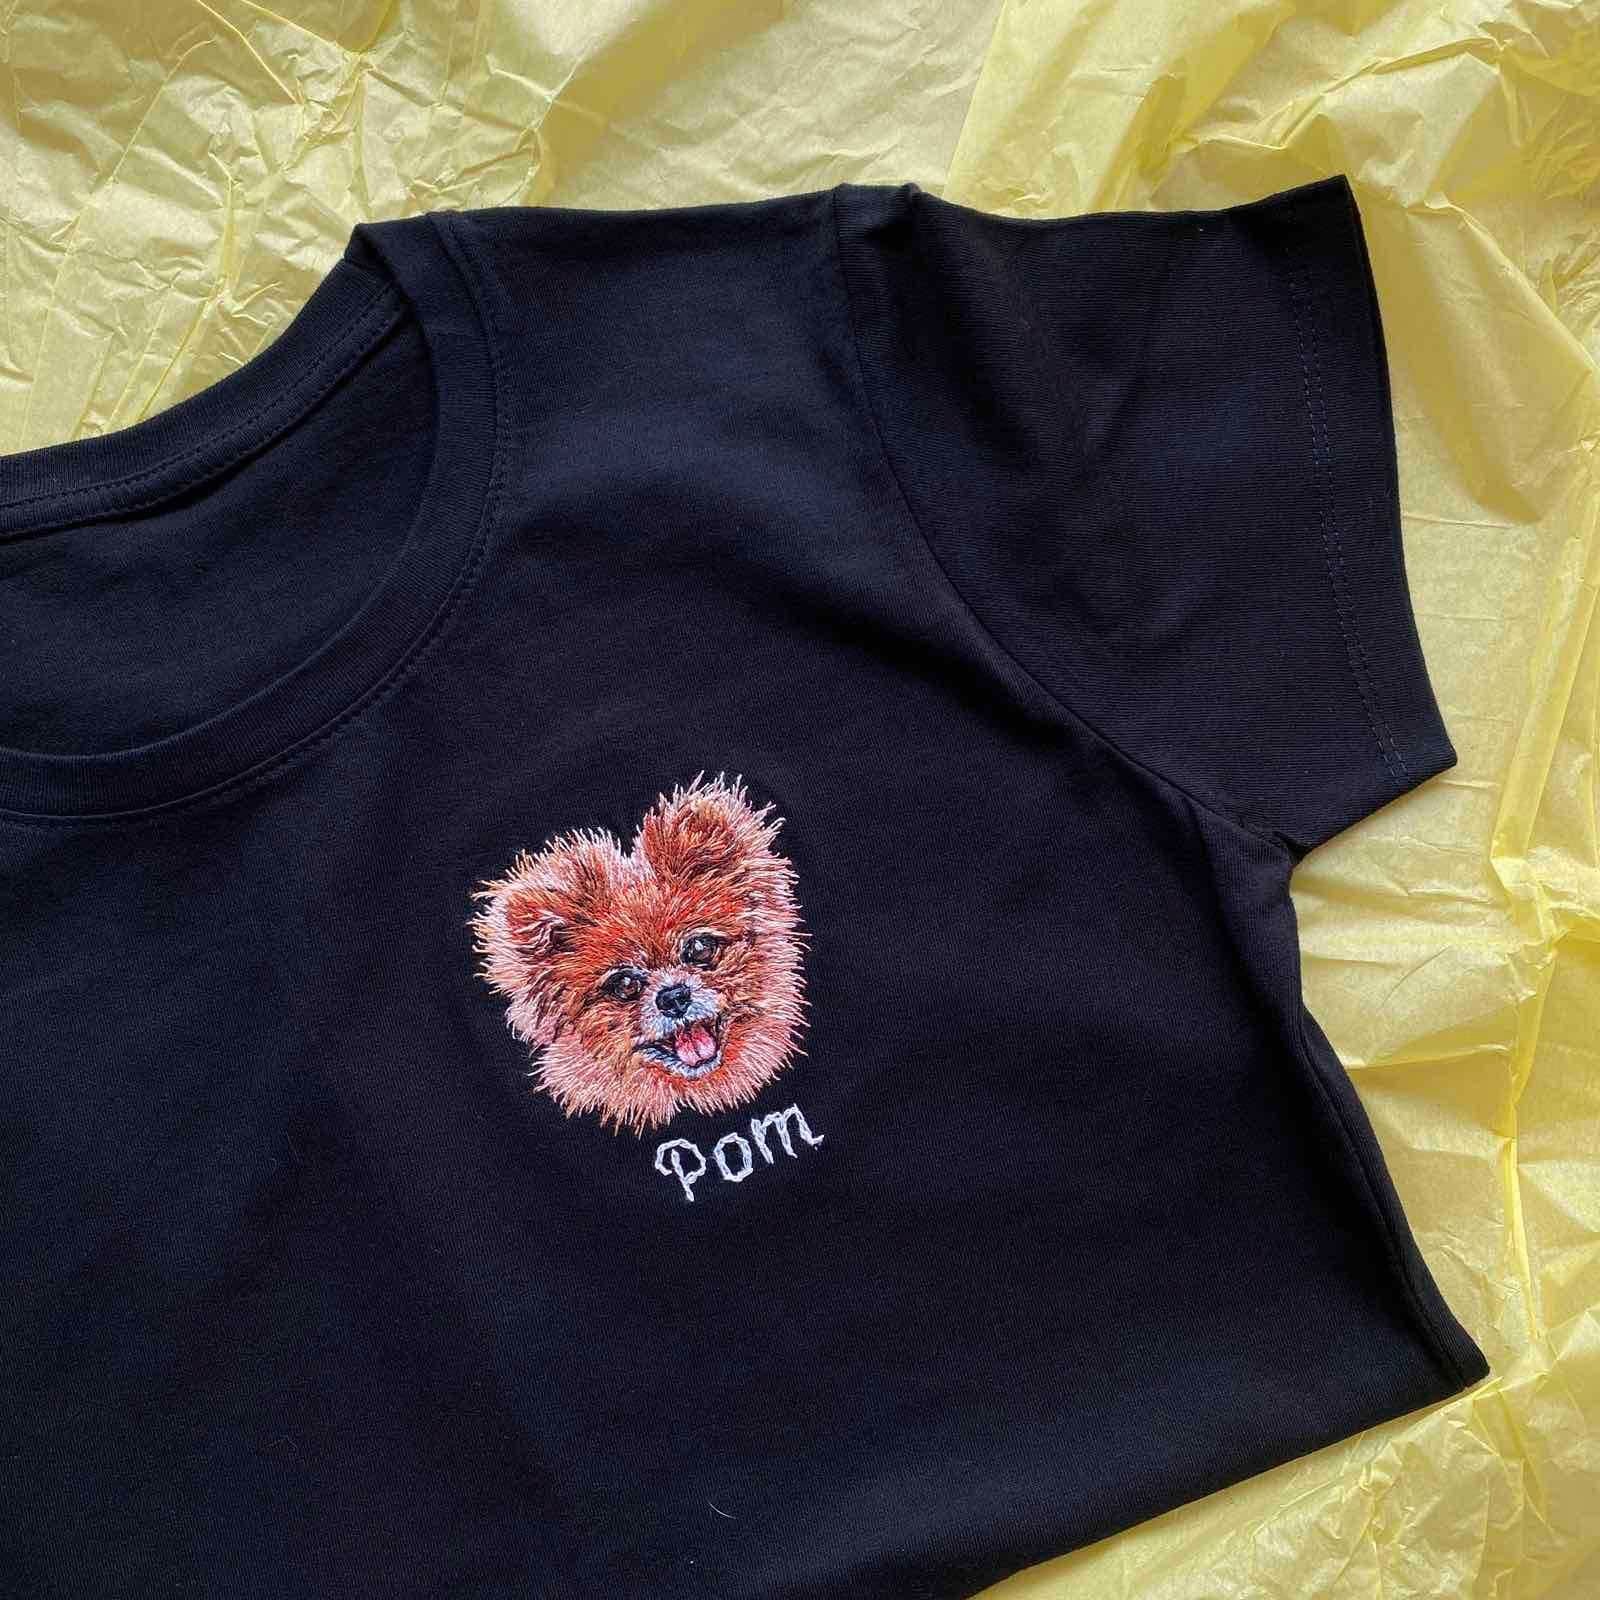 Hand Embroidered Pet Portrait T-shirt